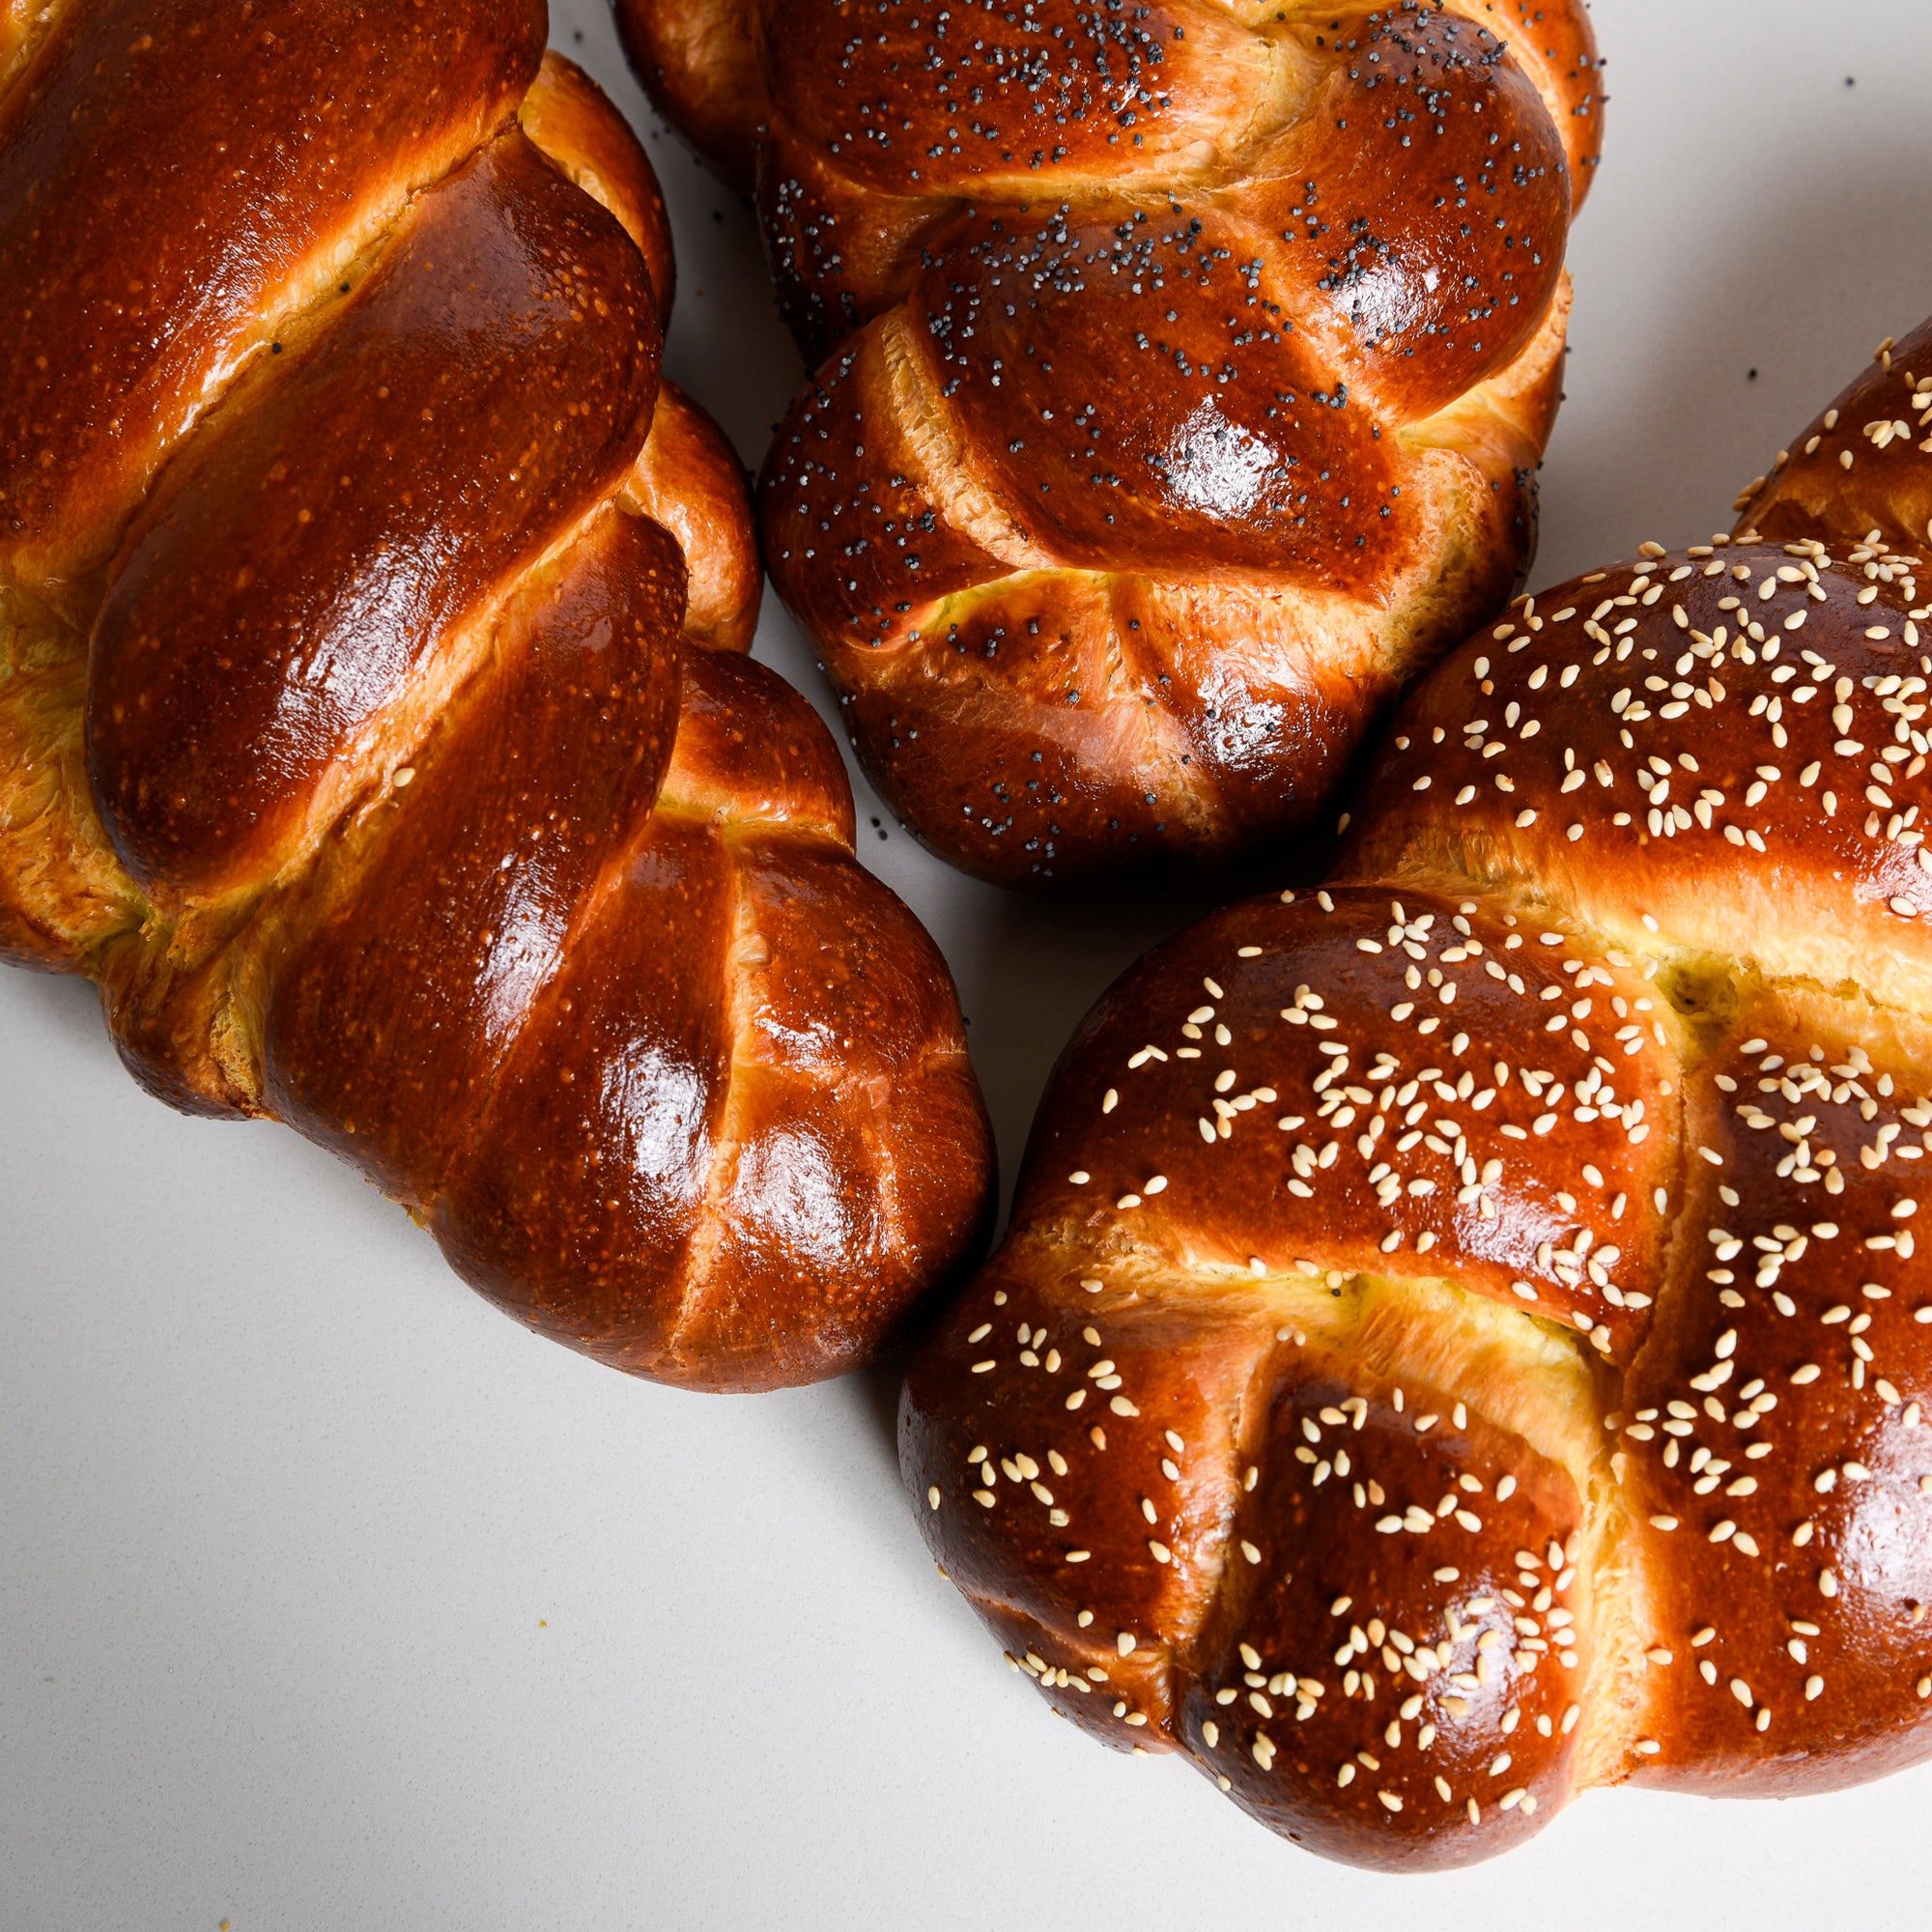 Group of challah traditional enriched breads by Le forunil bakery